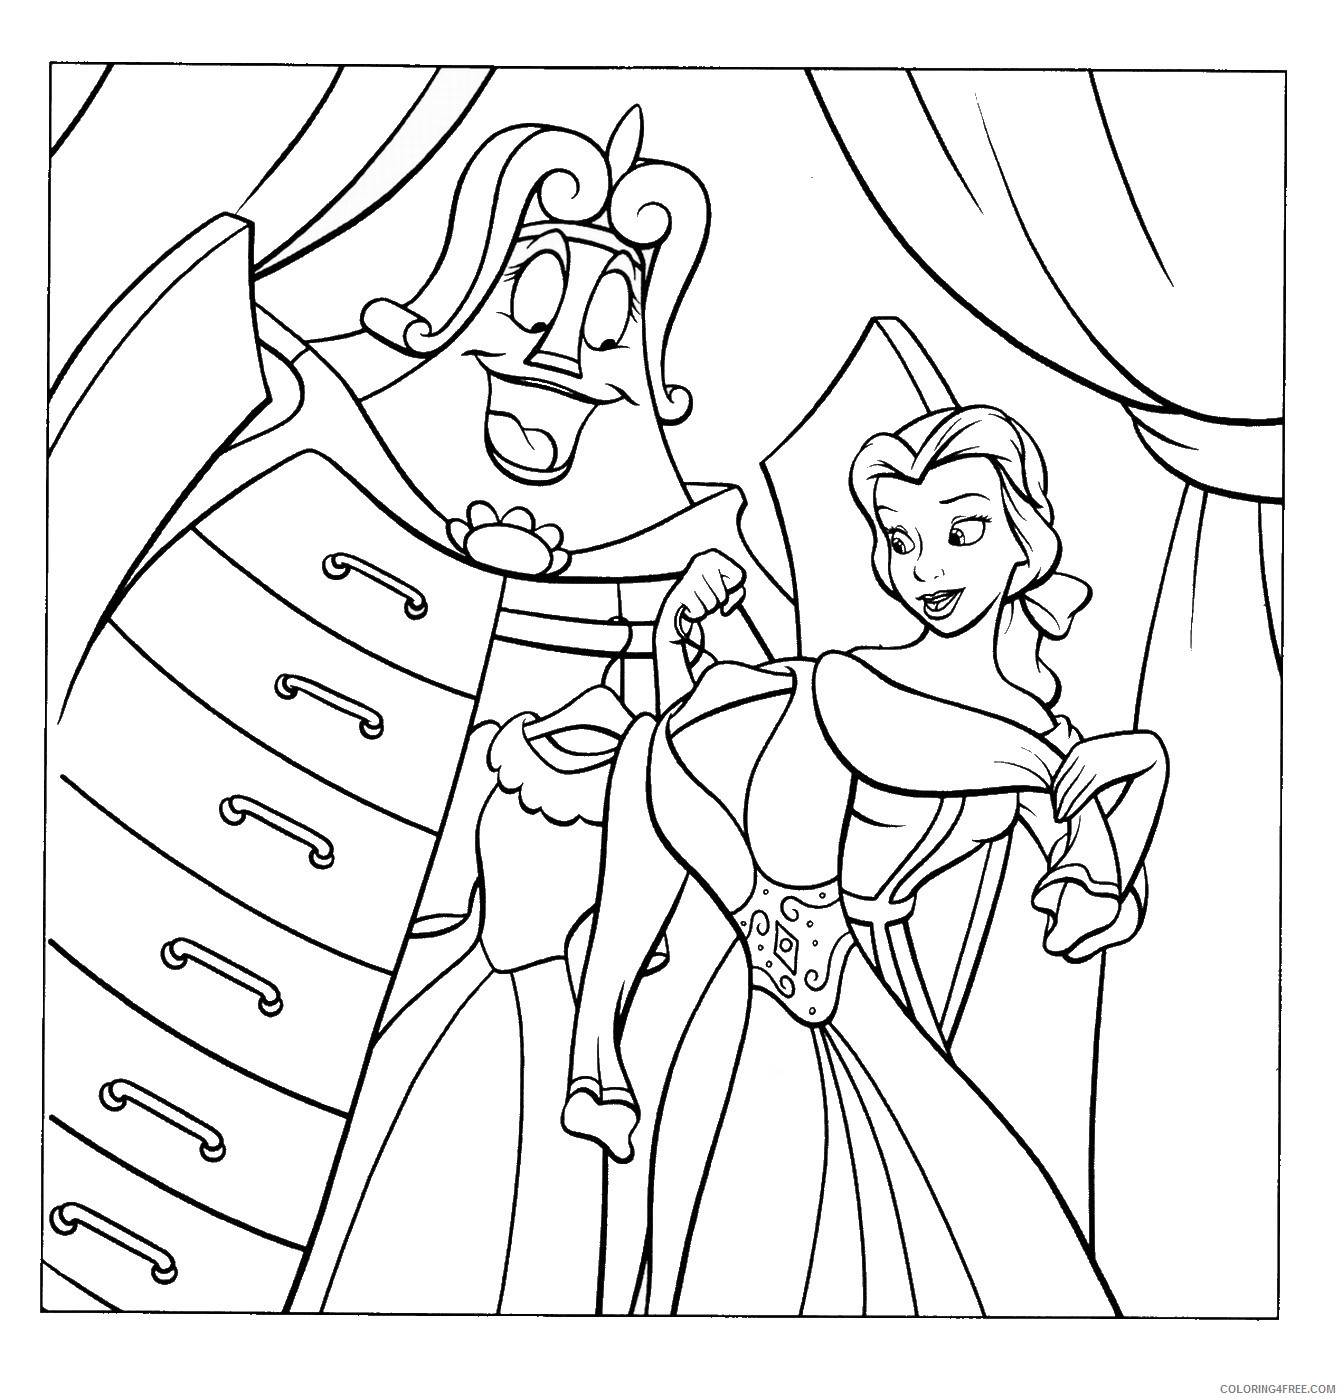 Beauty and the Beast Coloring Pages Cartoons the_beauty_beast_cl_35 Printable 2020 1200 Coloring4free